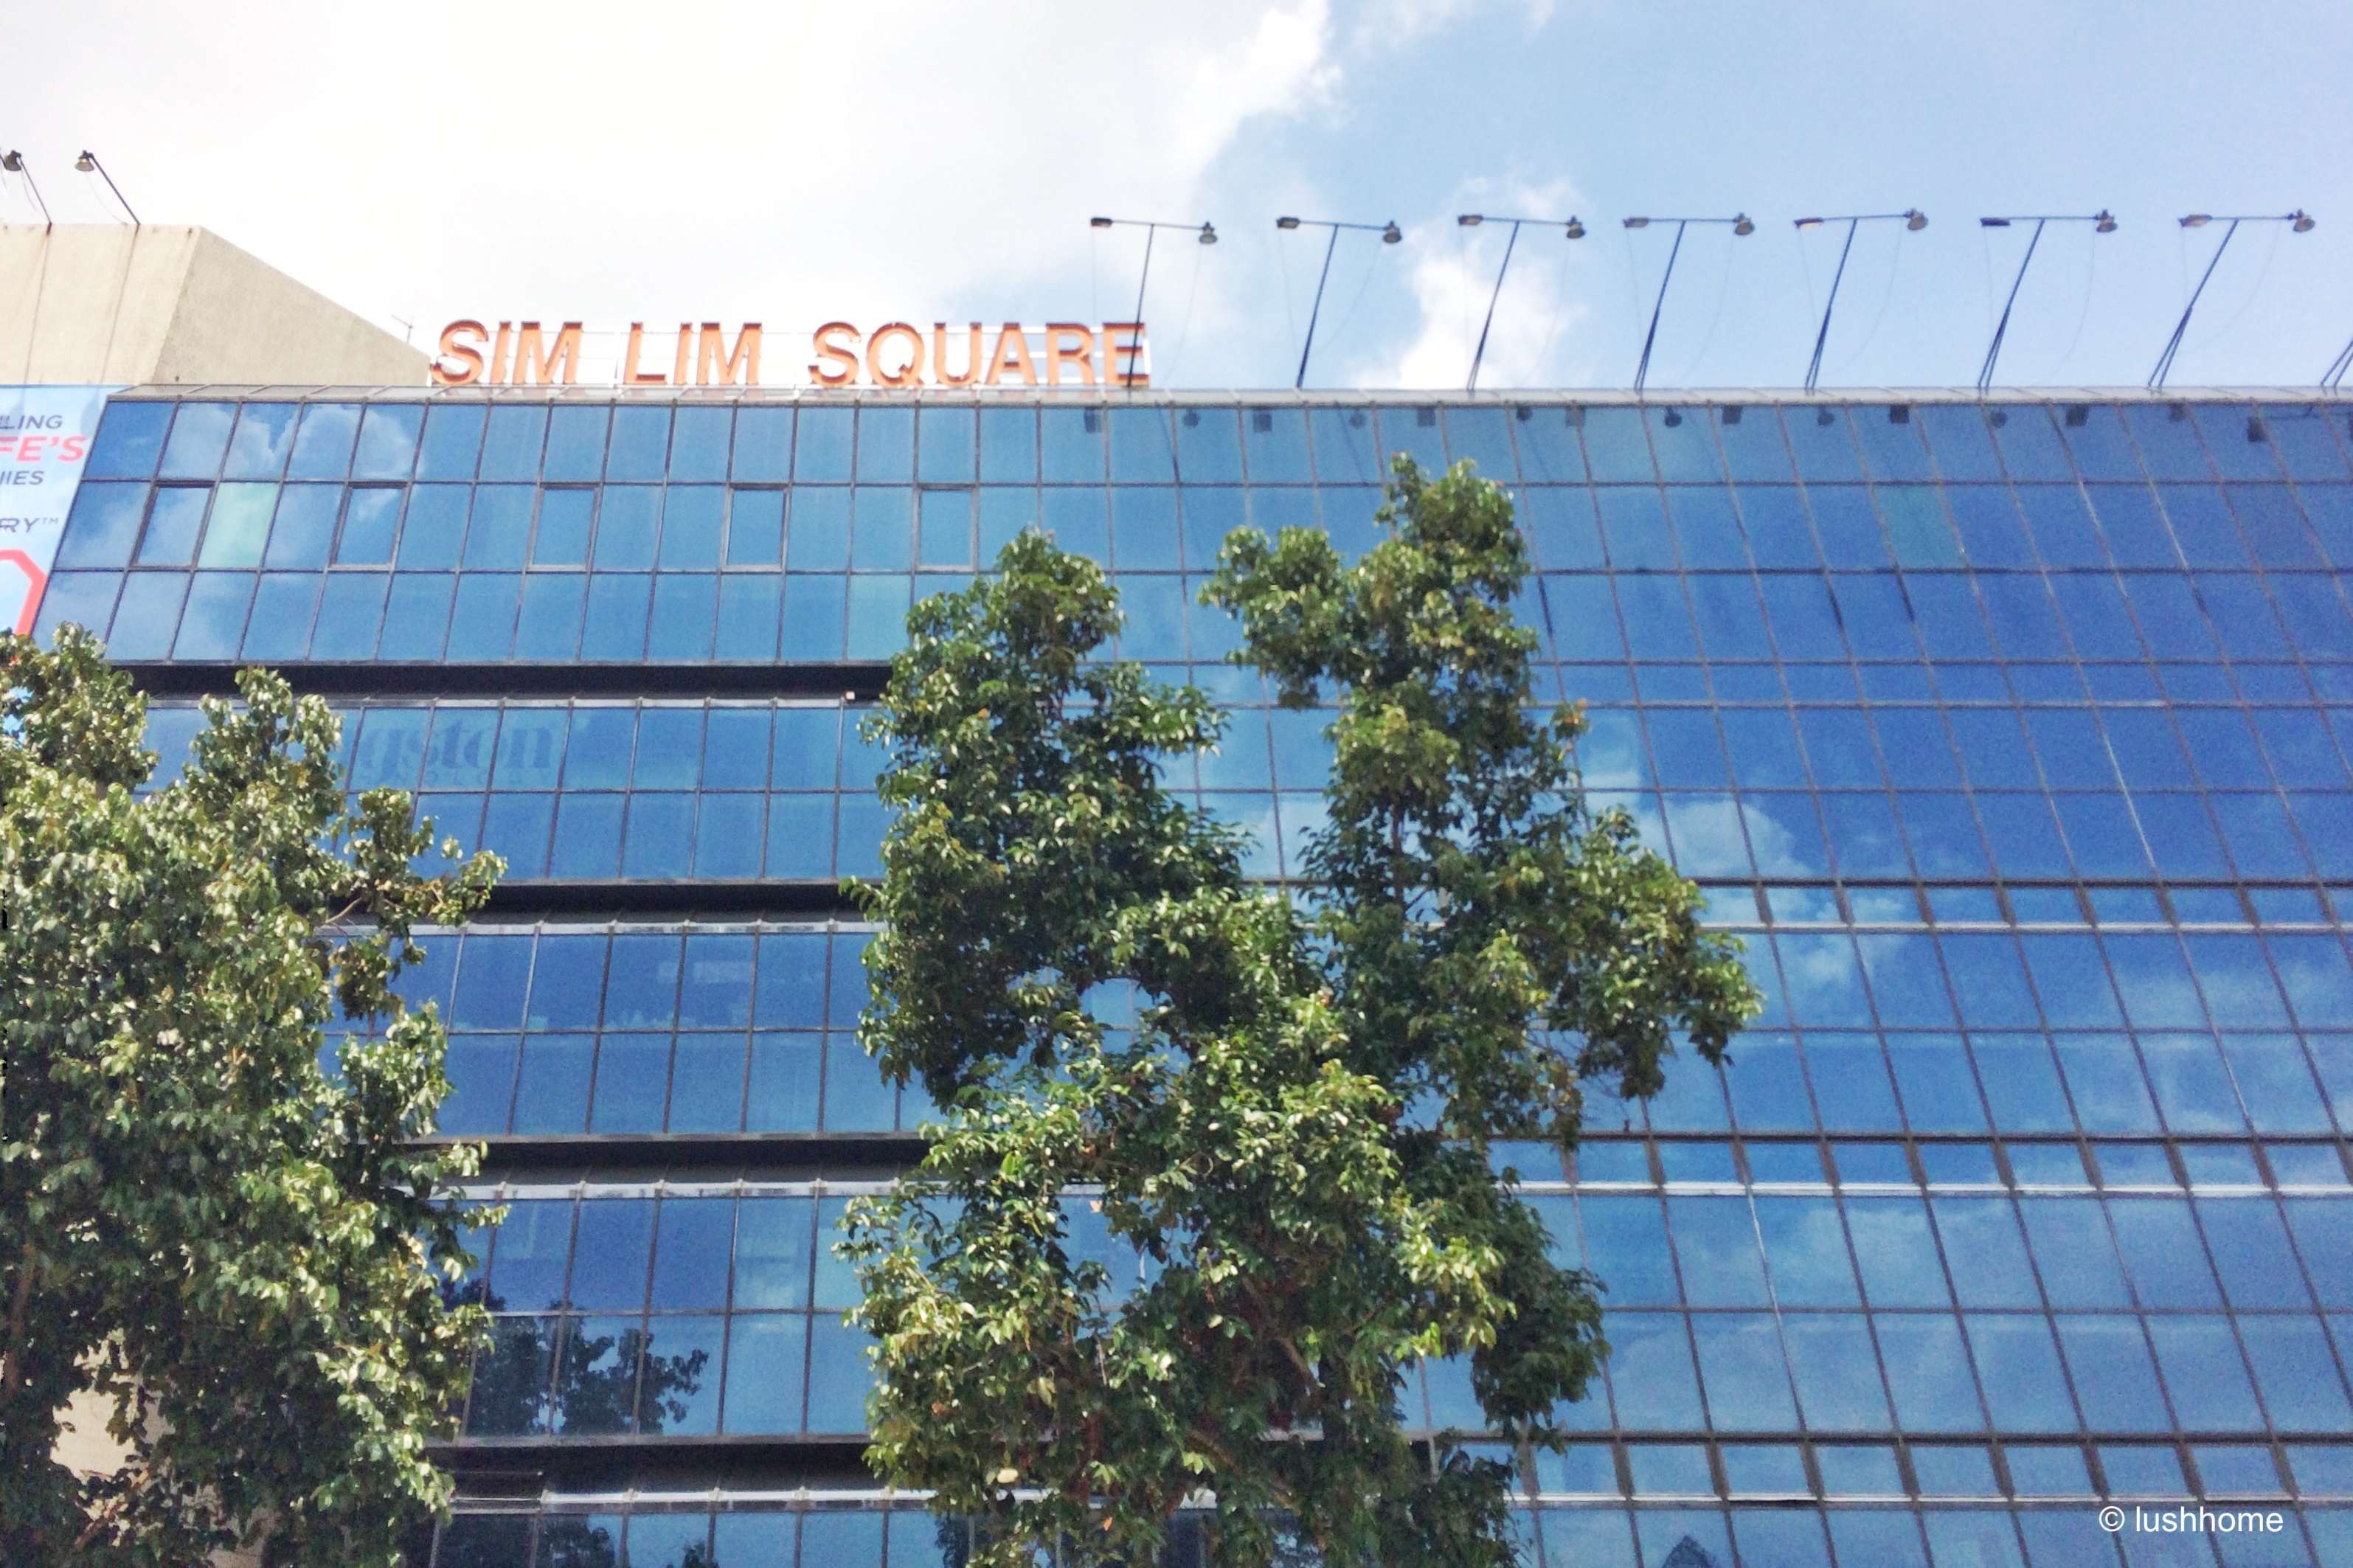 Sim Lim Square retail mall makes second run for collective sale